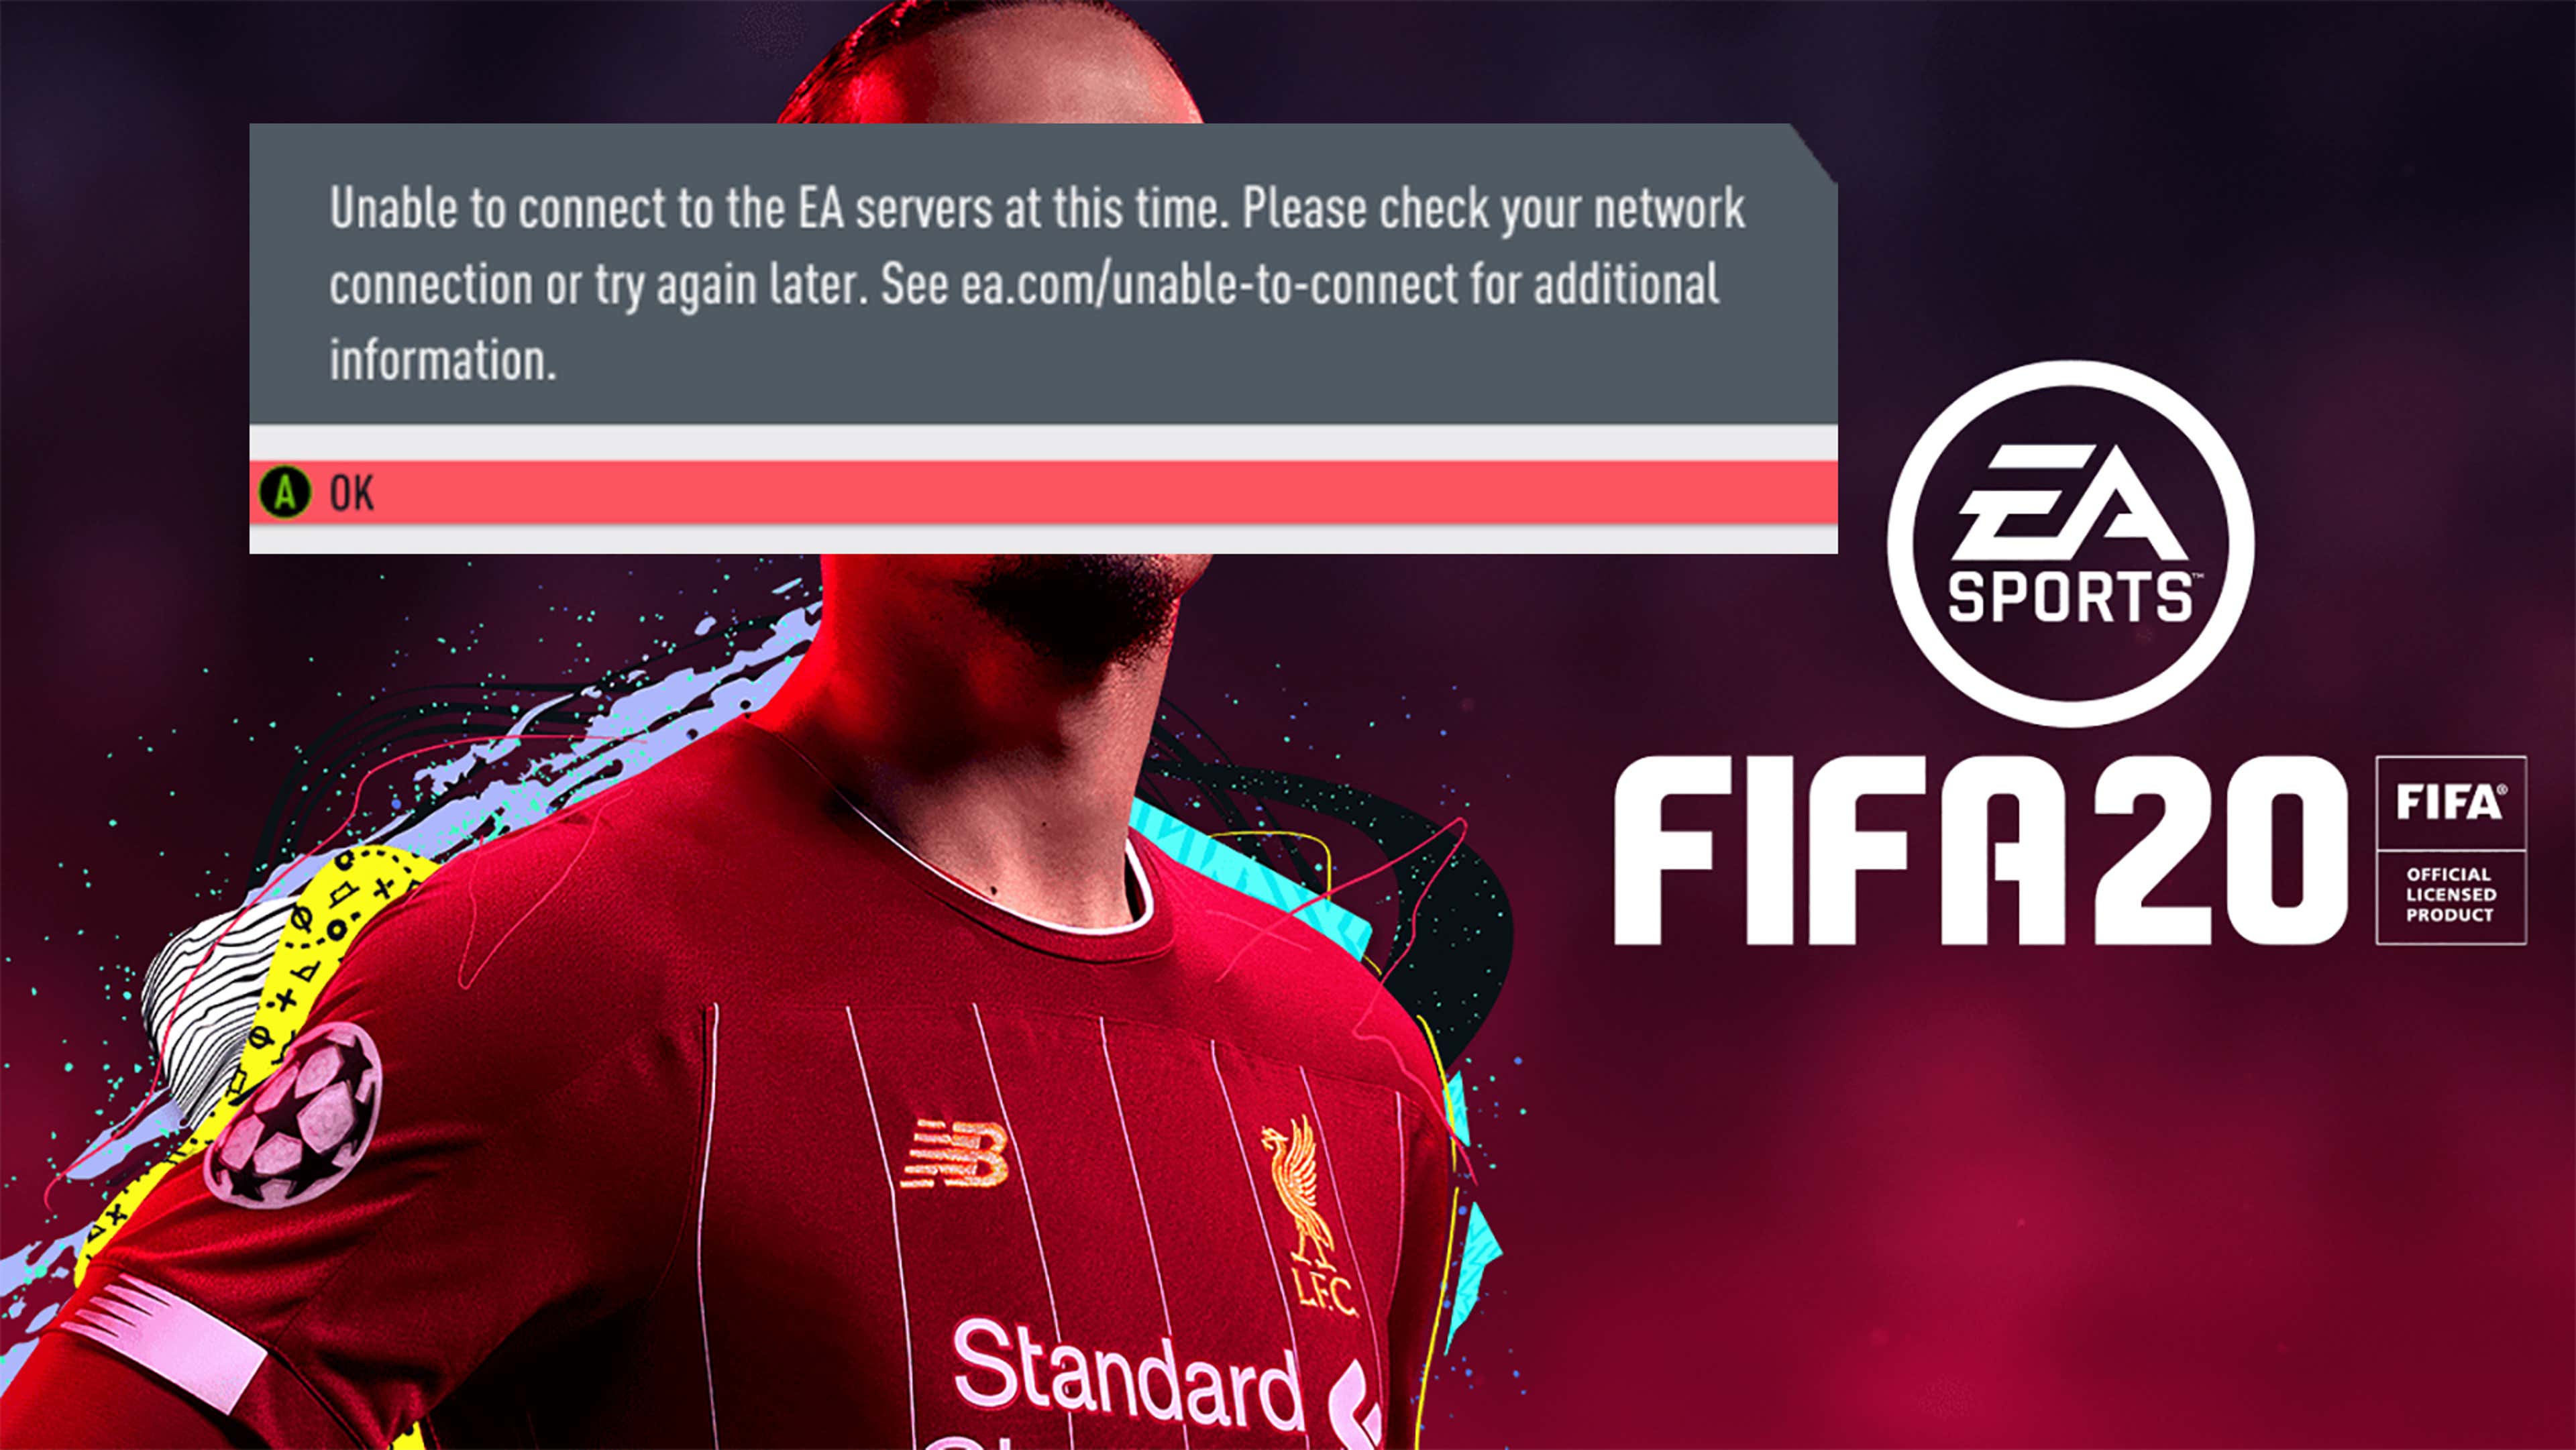 FIFA 23 Web App DOWN: Login issues again reported with FUT Web App, EA  looking into fix, Gaming, Entertainment